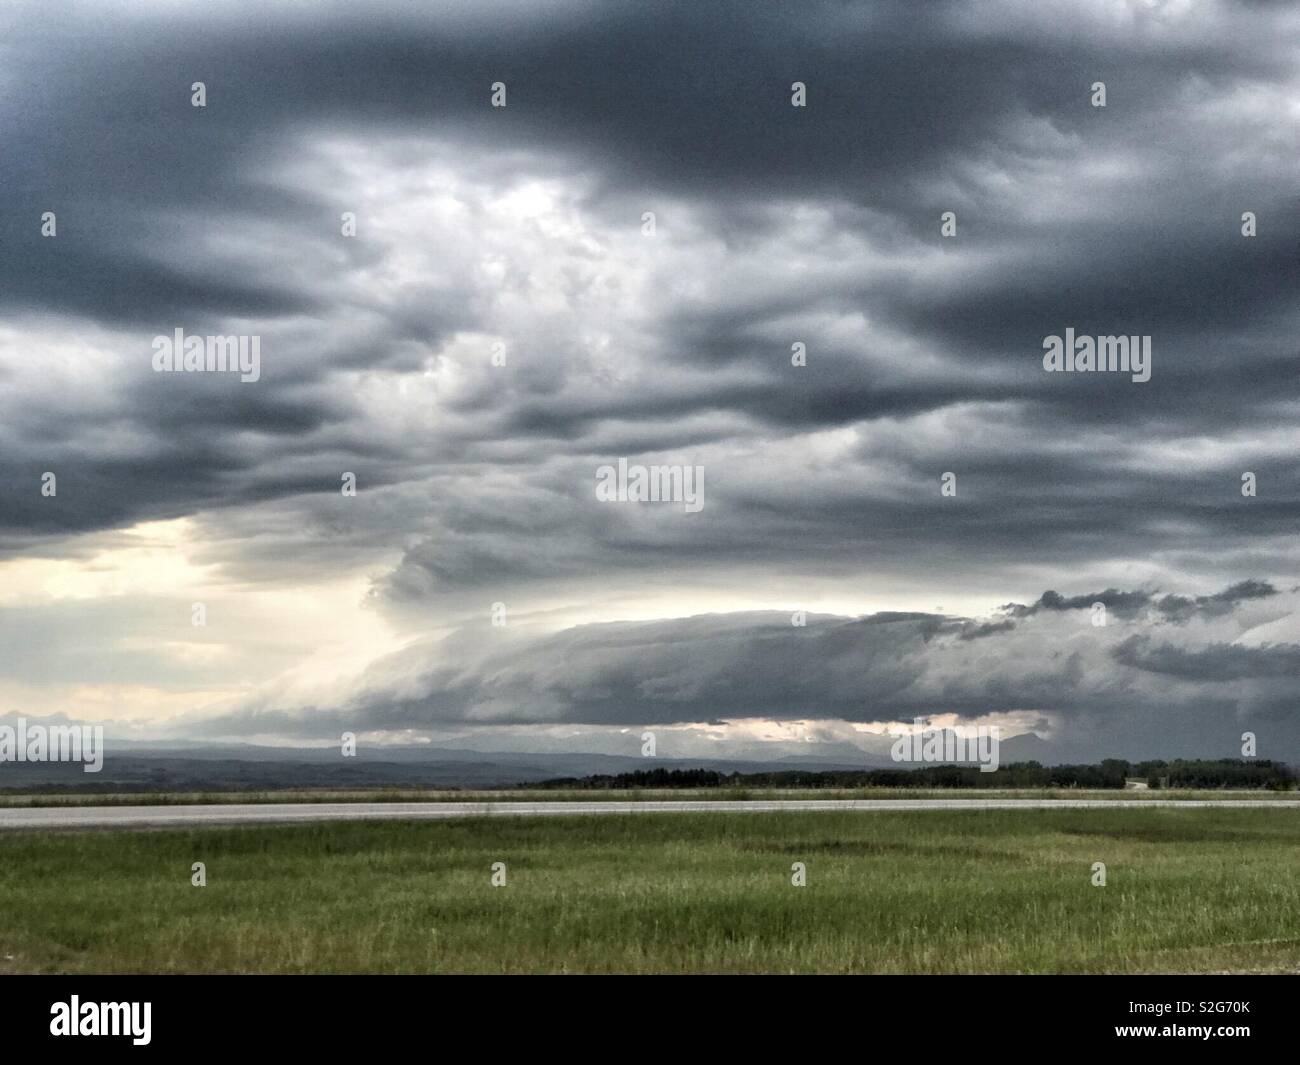 A shelf cloud hangs low over a foothills landscape with ominous clouds above. Stock Photo